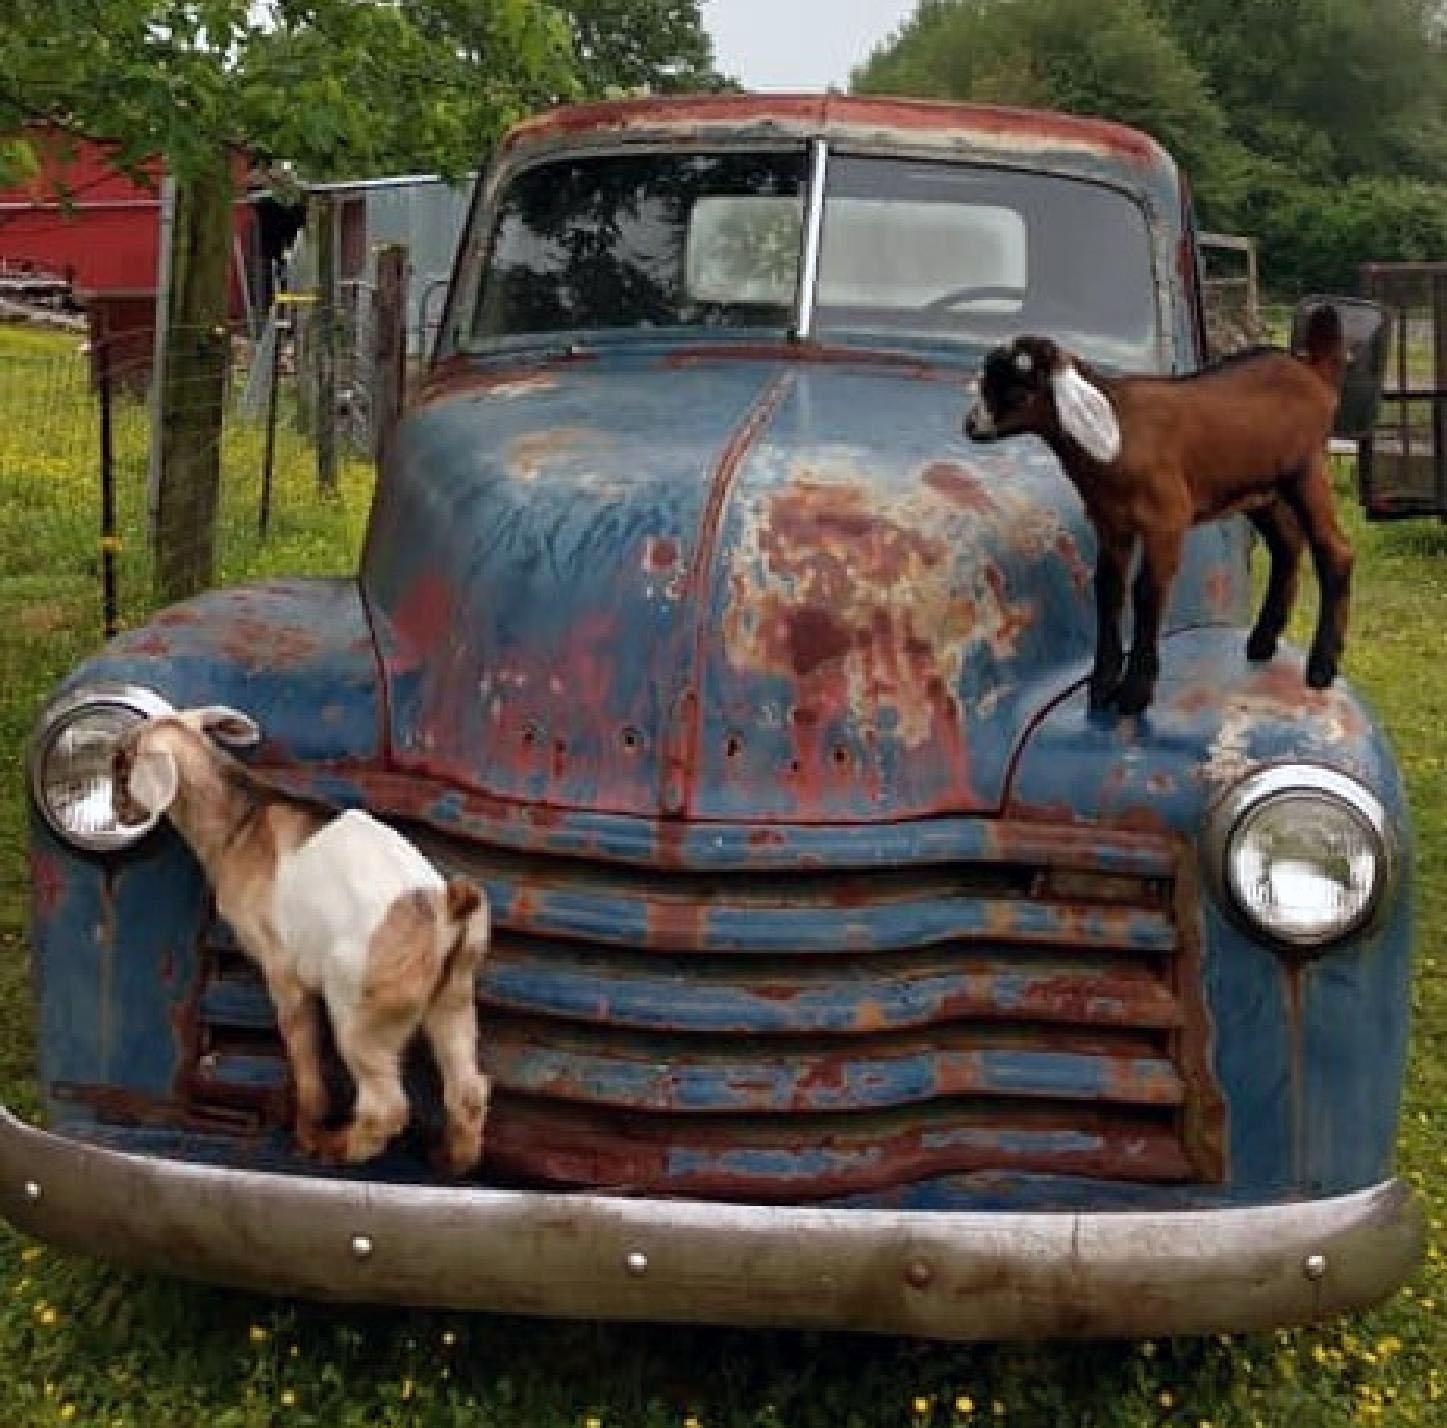 Goats standing on antique pick-up truck